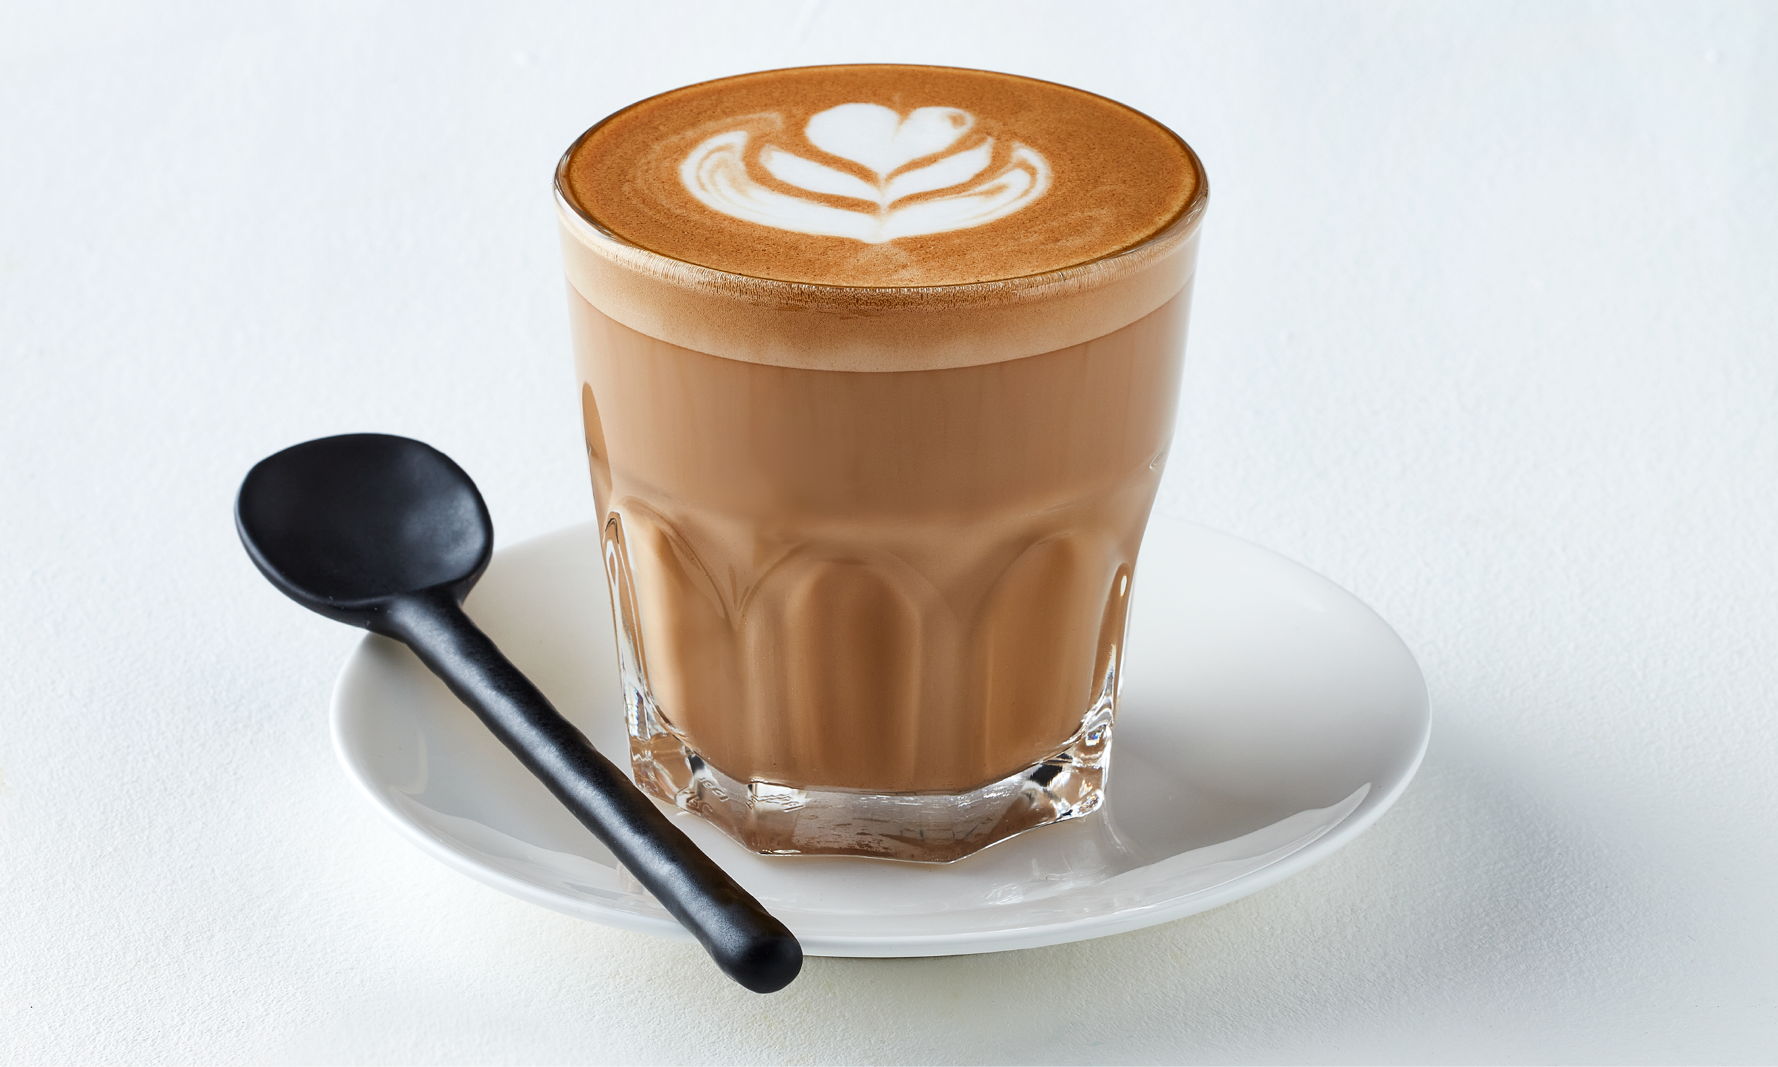 What Is a Cortado Coffee?